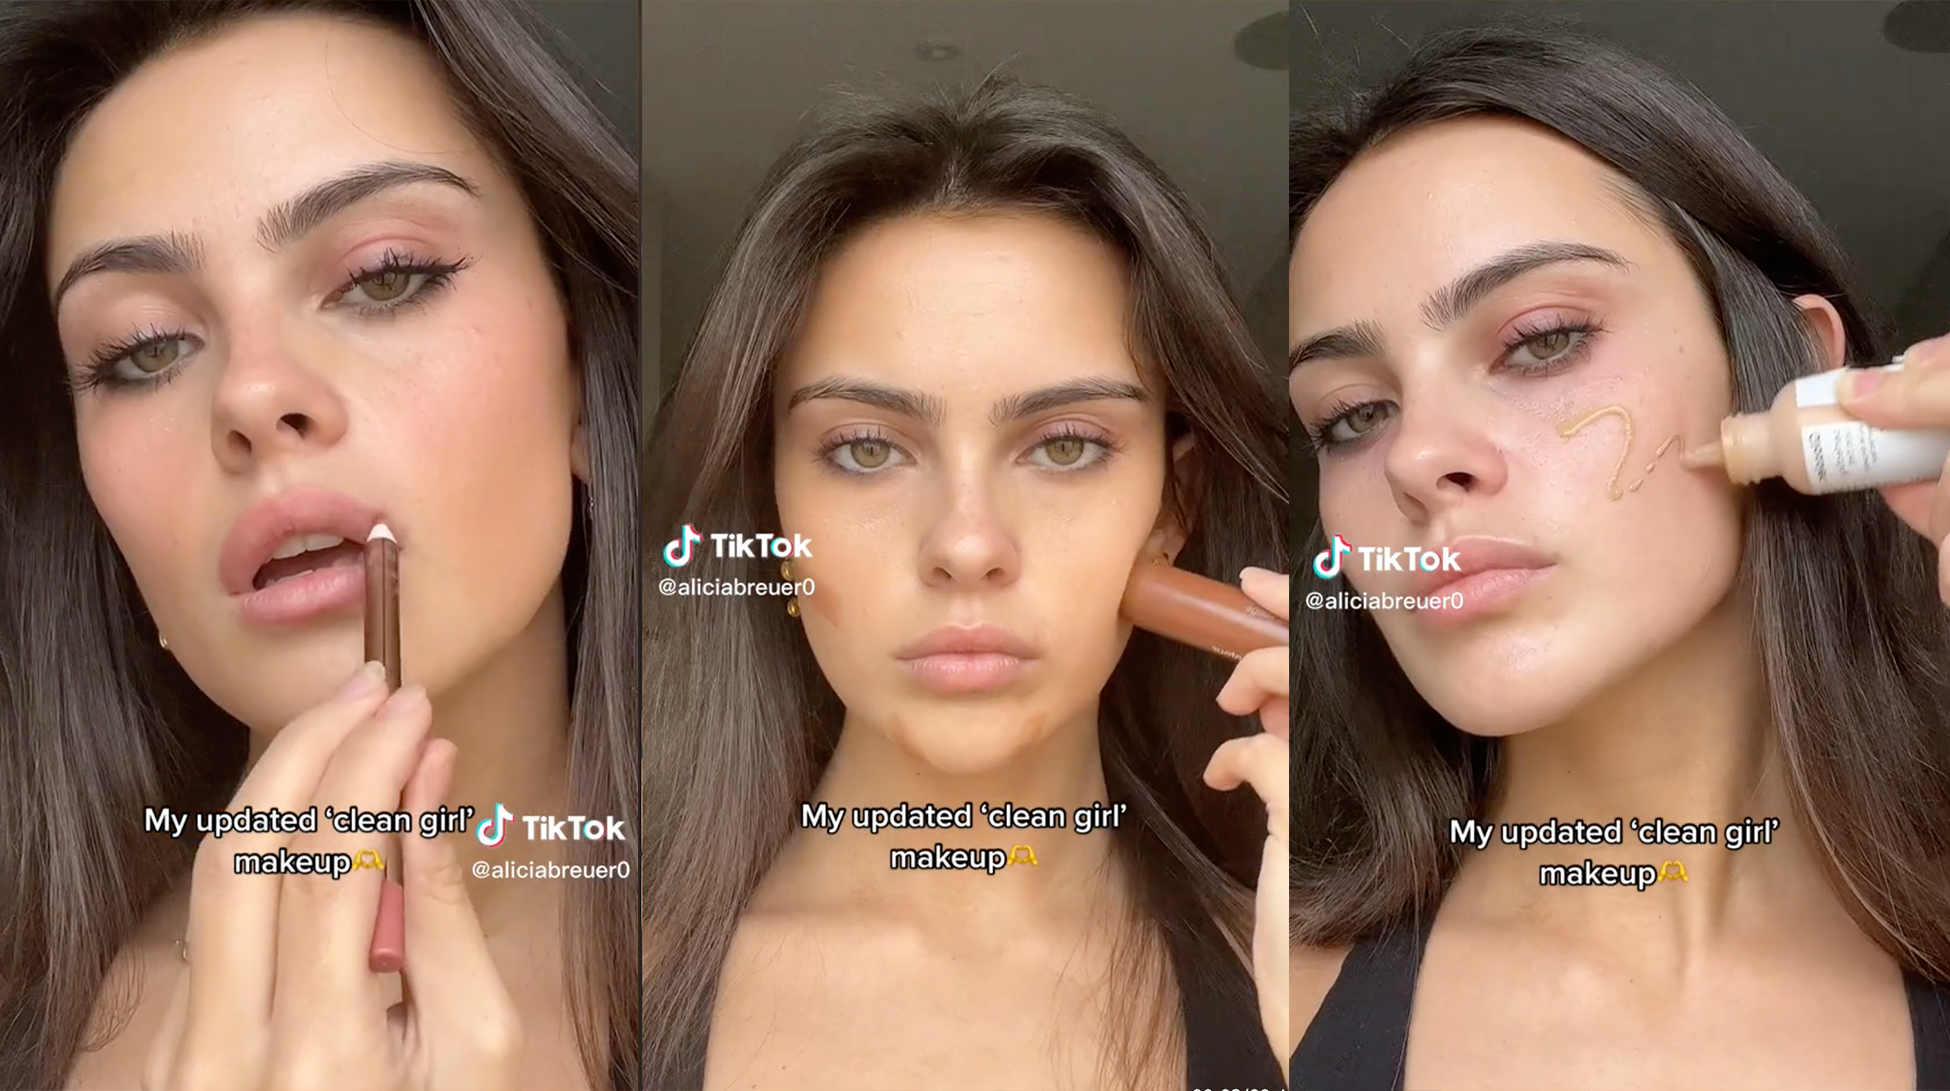 What Is The 'That Girl' Aesthetic On TikTok?